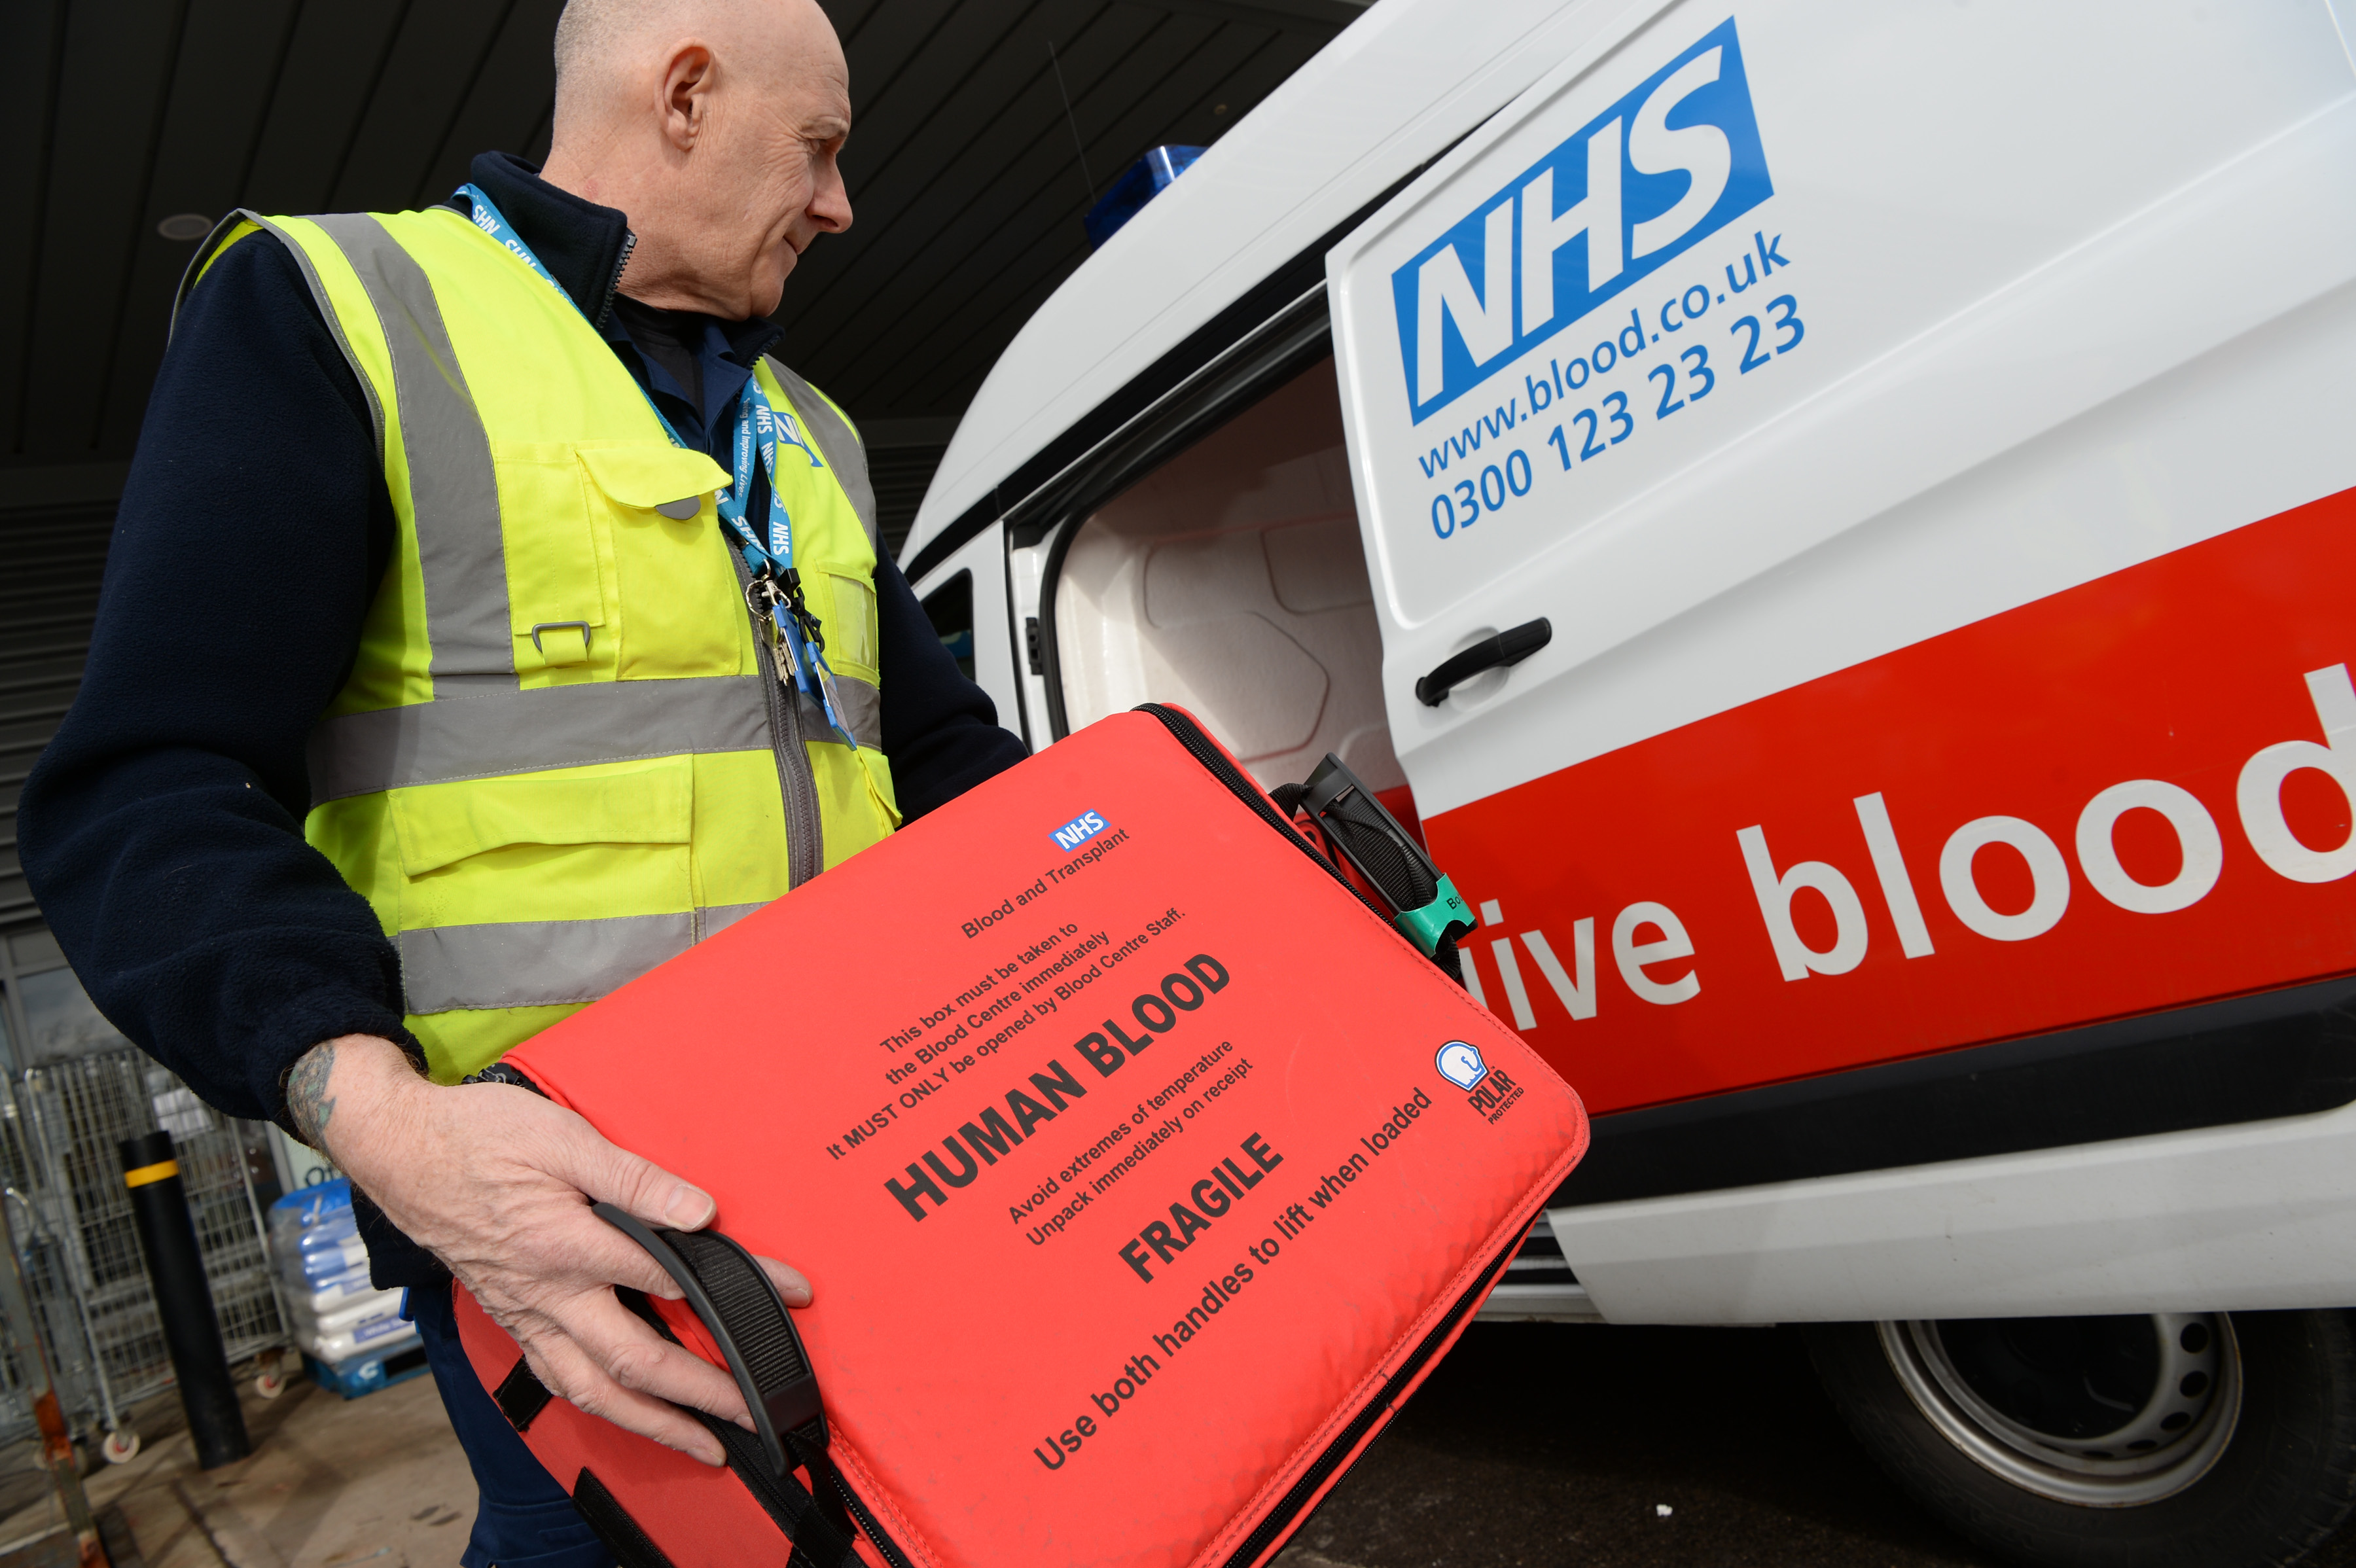 A member of NHSBT staff loading a case containing donated blood into a van